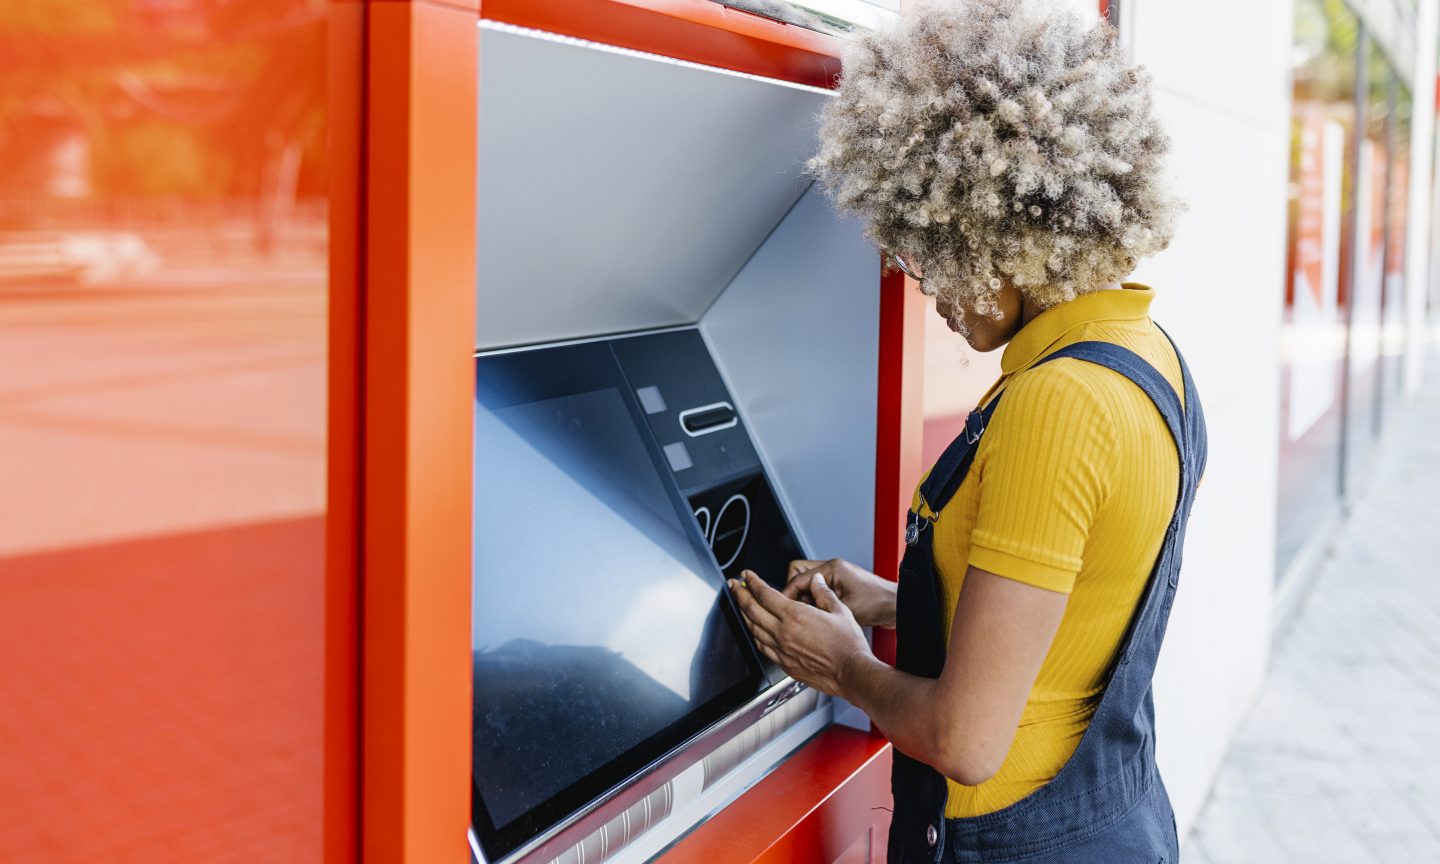 8 Best Banks With No ATM Fees - NerdWallet